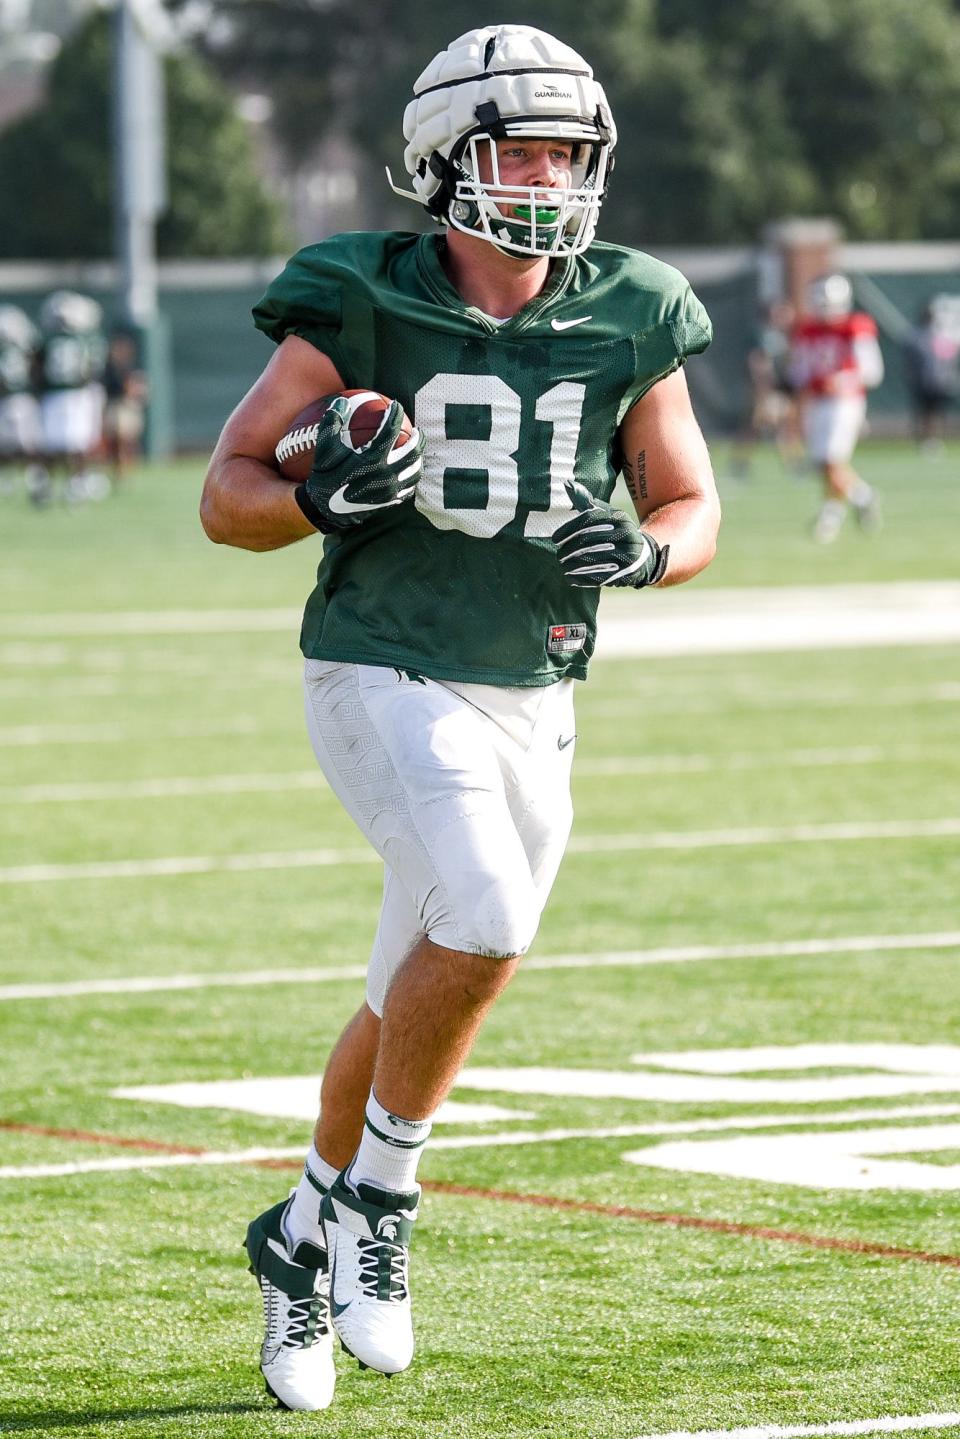 Michigan State's Parks Gissinger runs after a catch during football camp on Tuesday, Aug. 17, 2021, on the MSU campus in East Lansing.